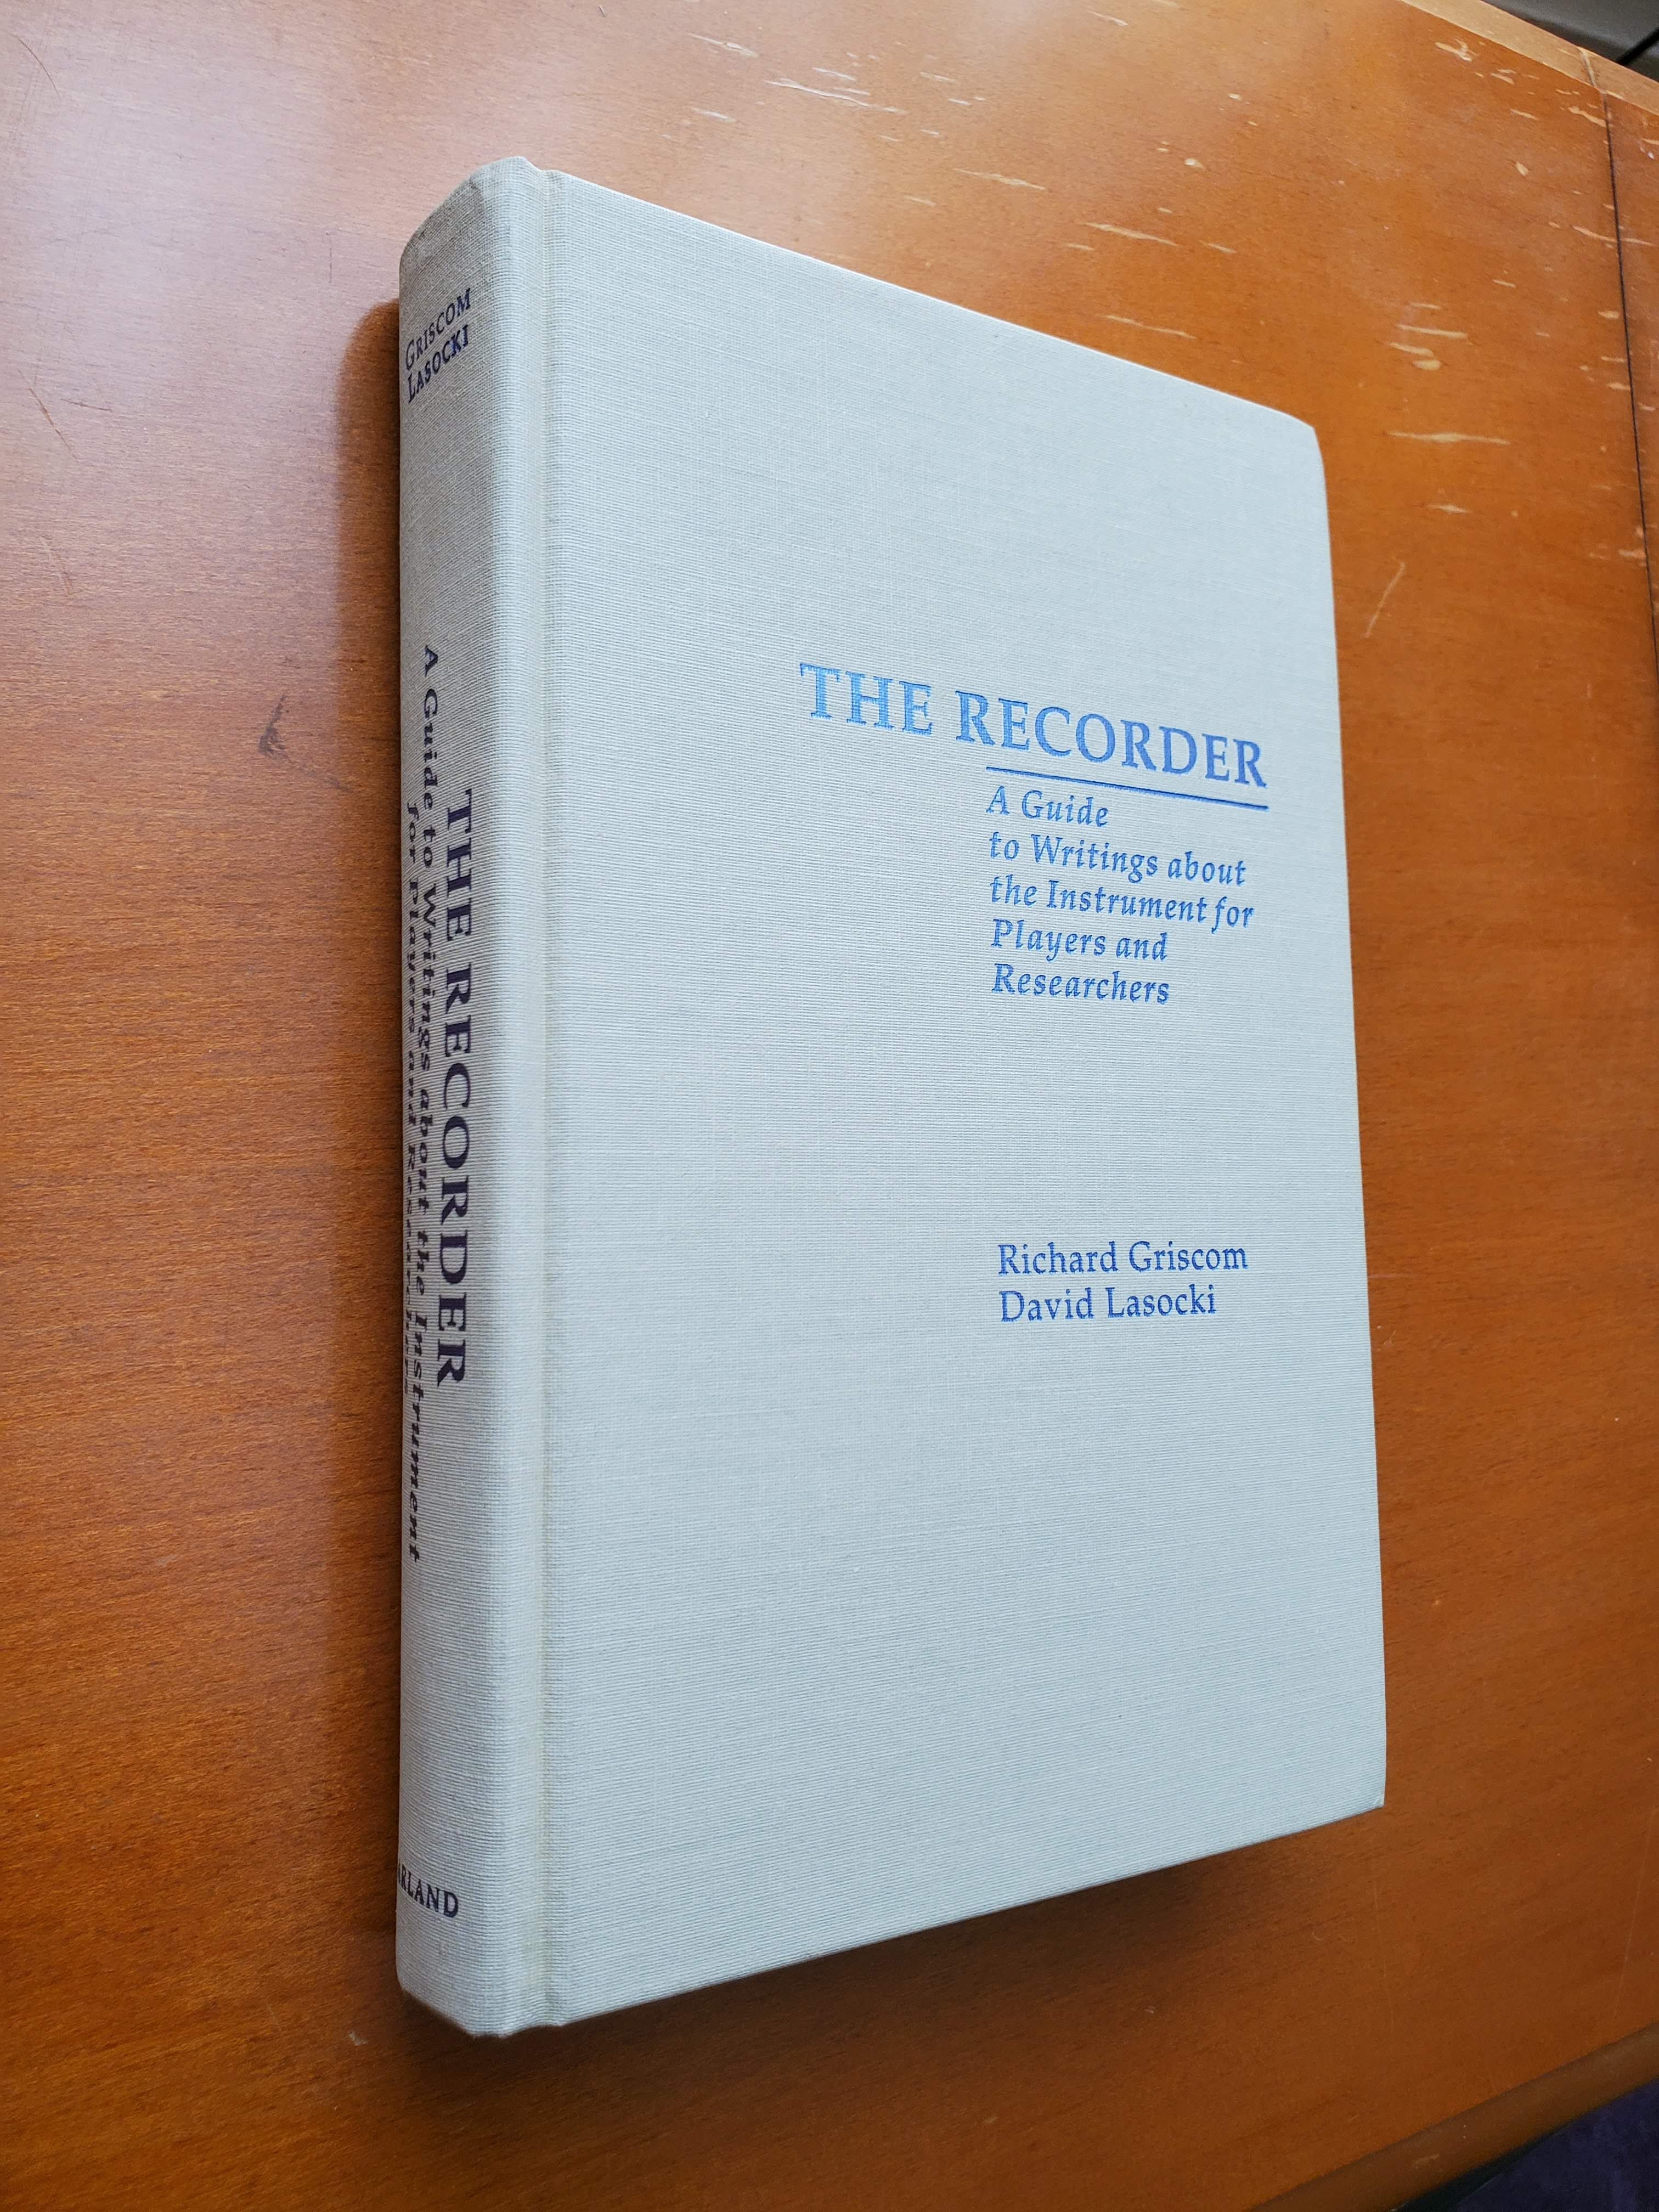 The Recorder: A Guide to Writings about the instrument for players and Researchers - Griscom, Richard; Lasocki, David